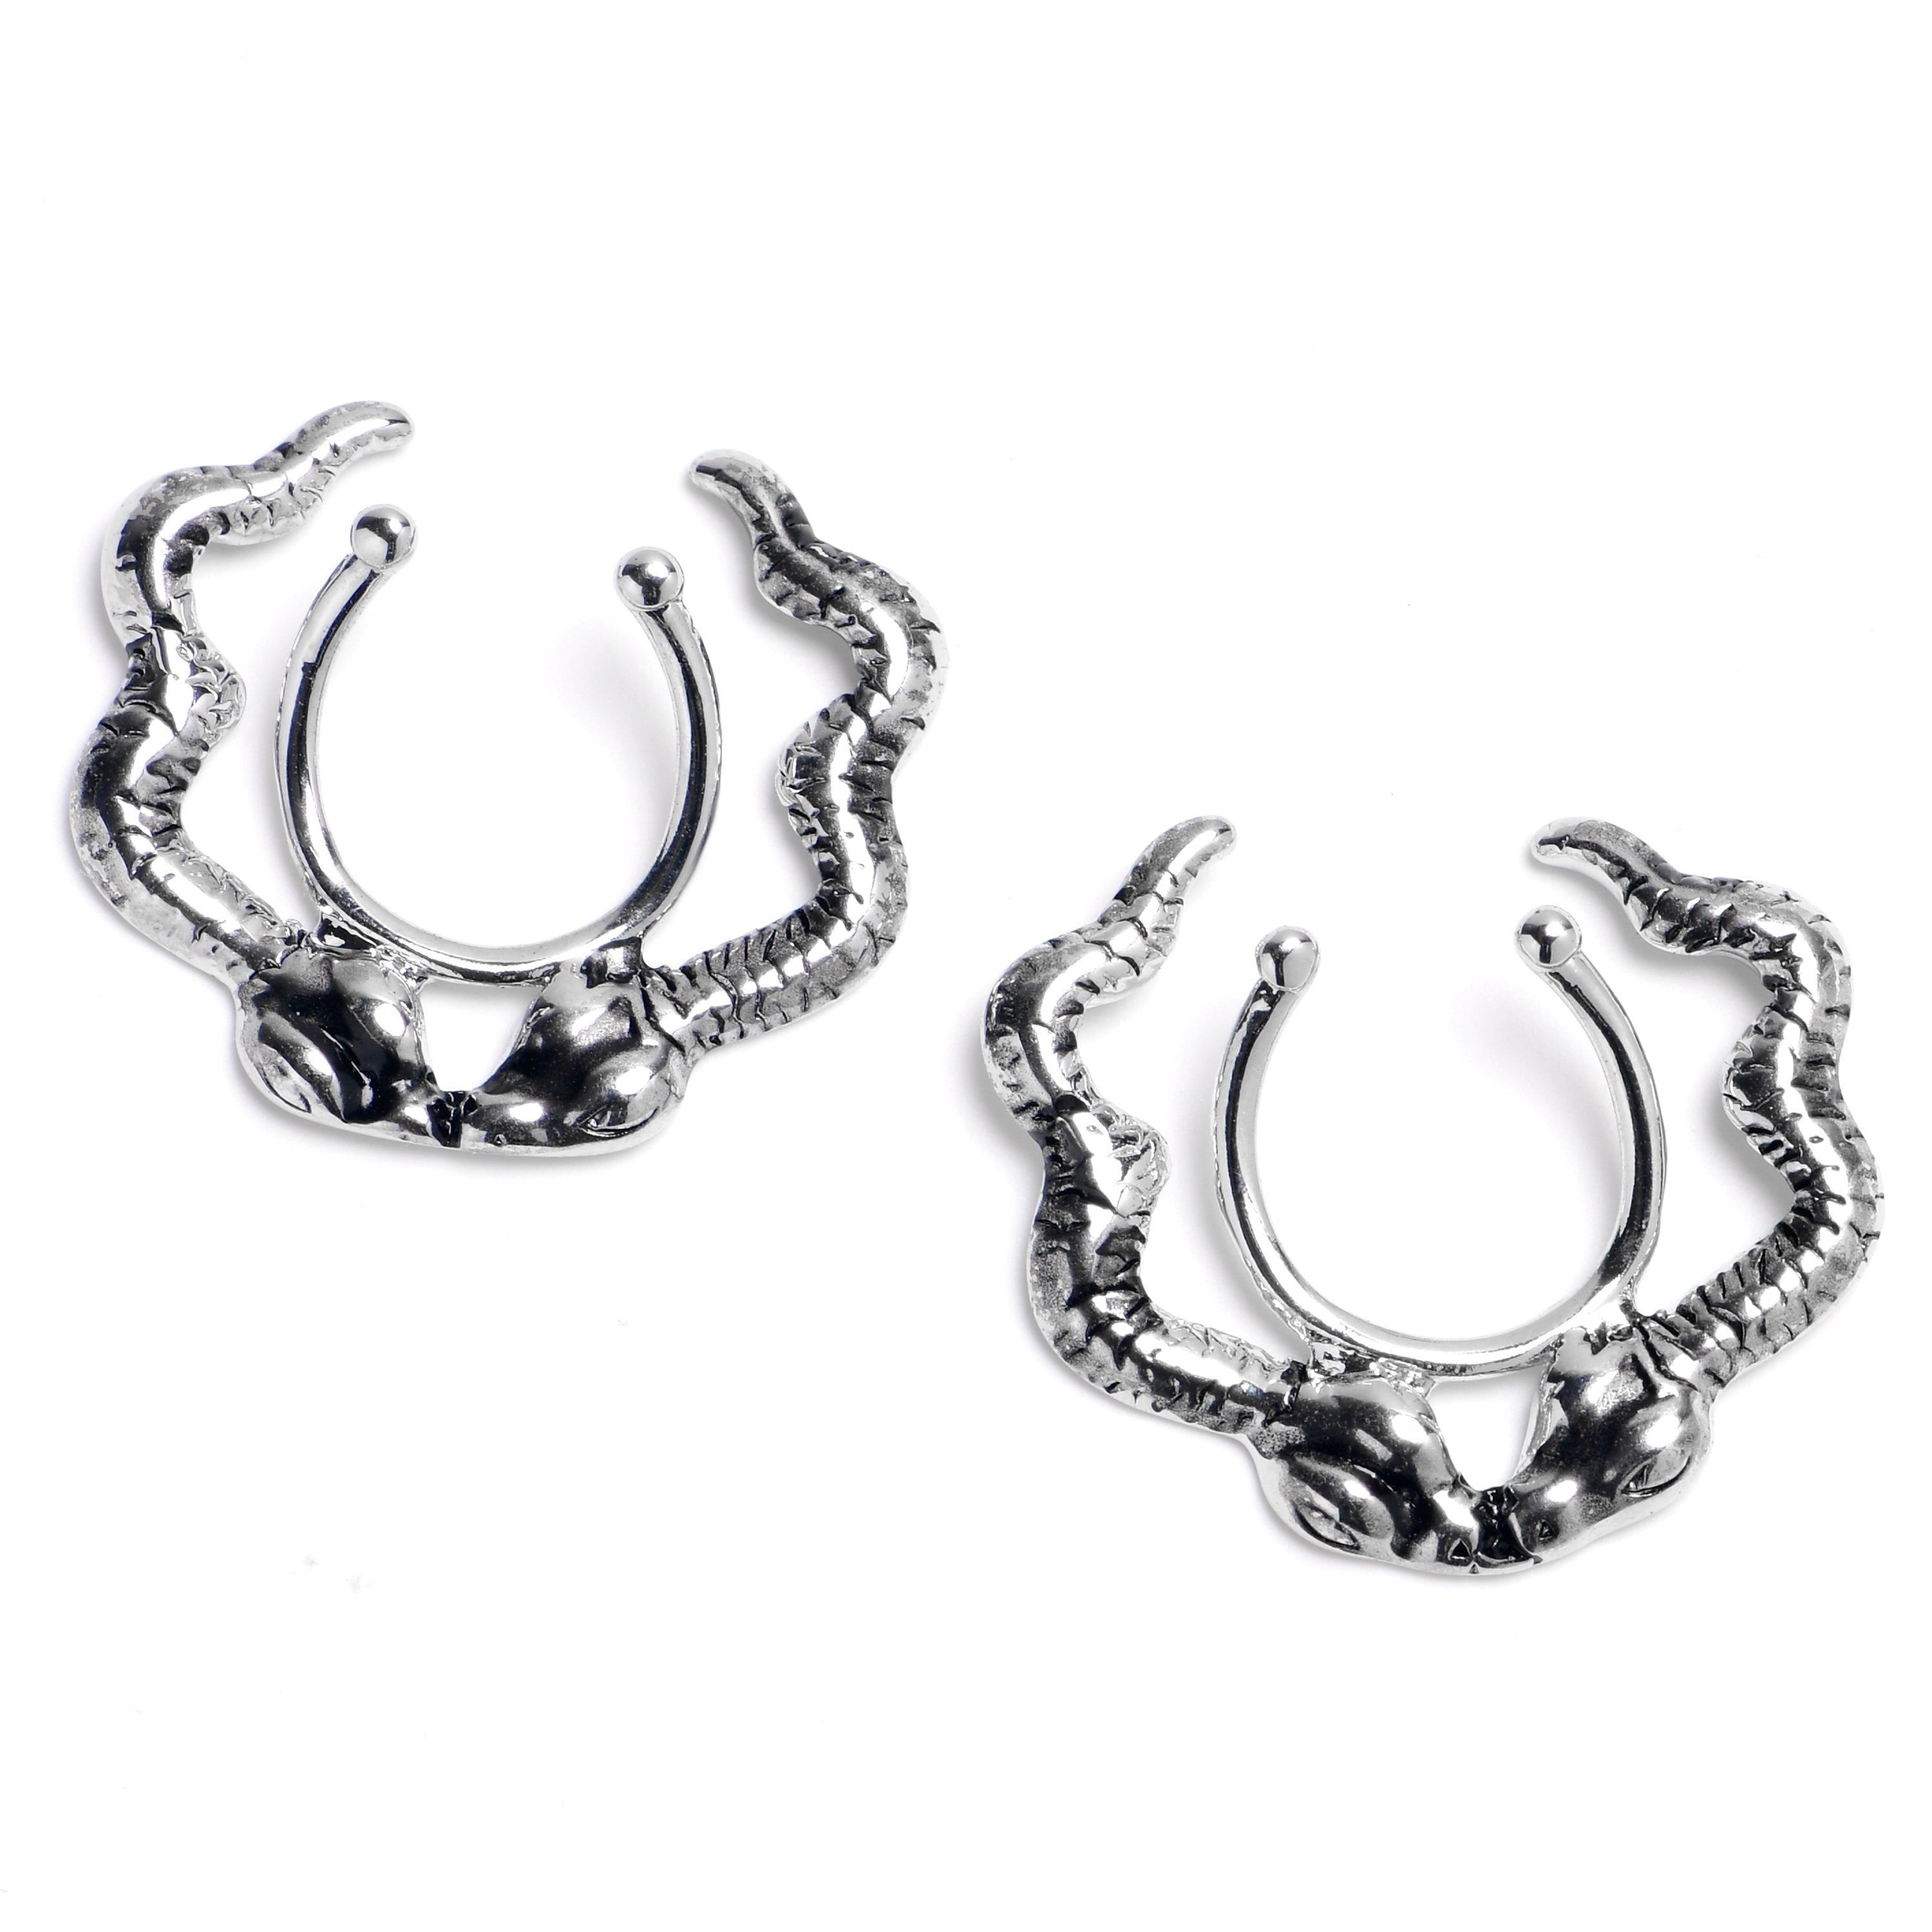 9 Piece Ear Stretching Kit in Stainless Steel Set of 2